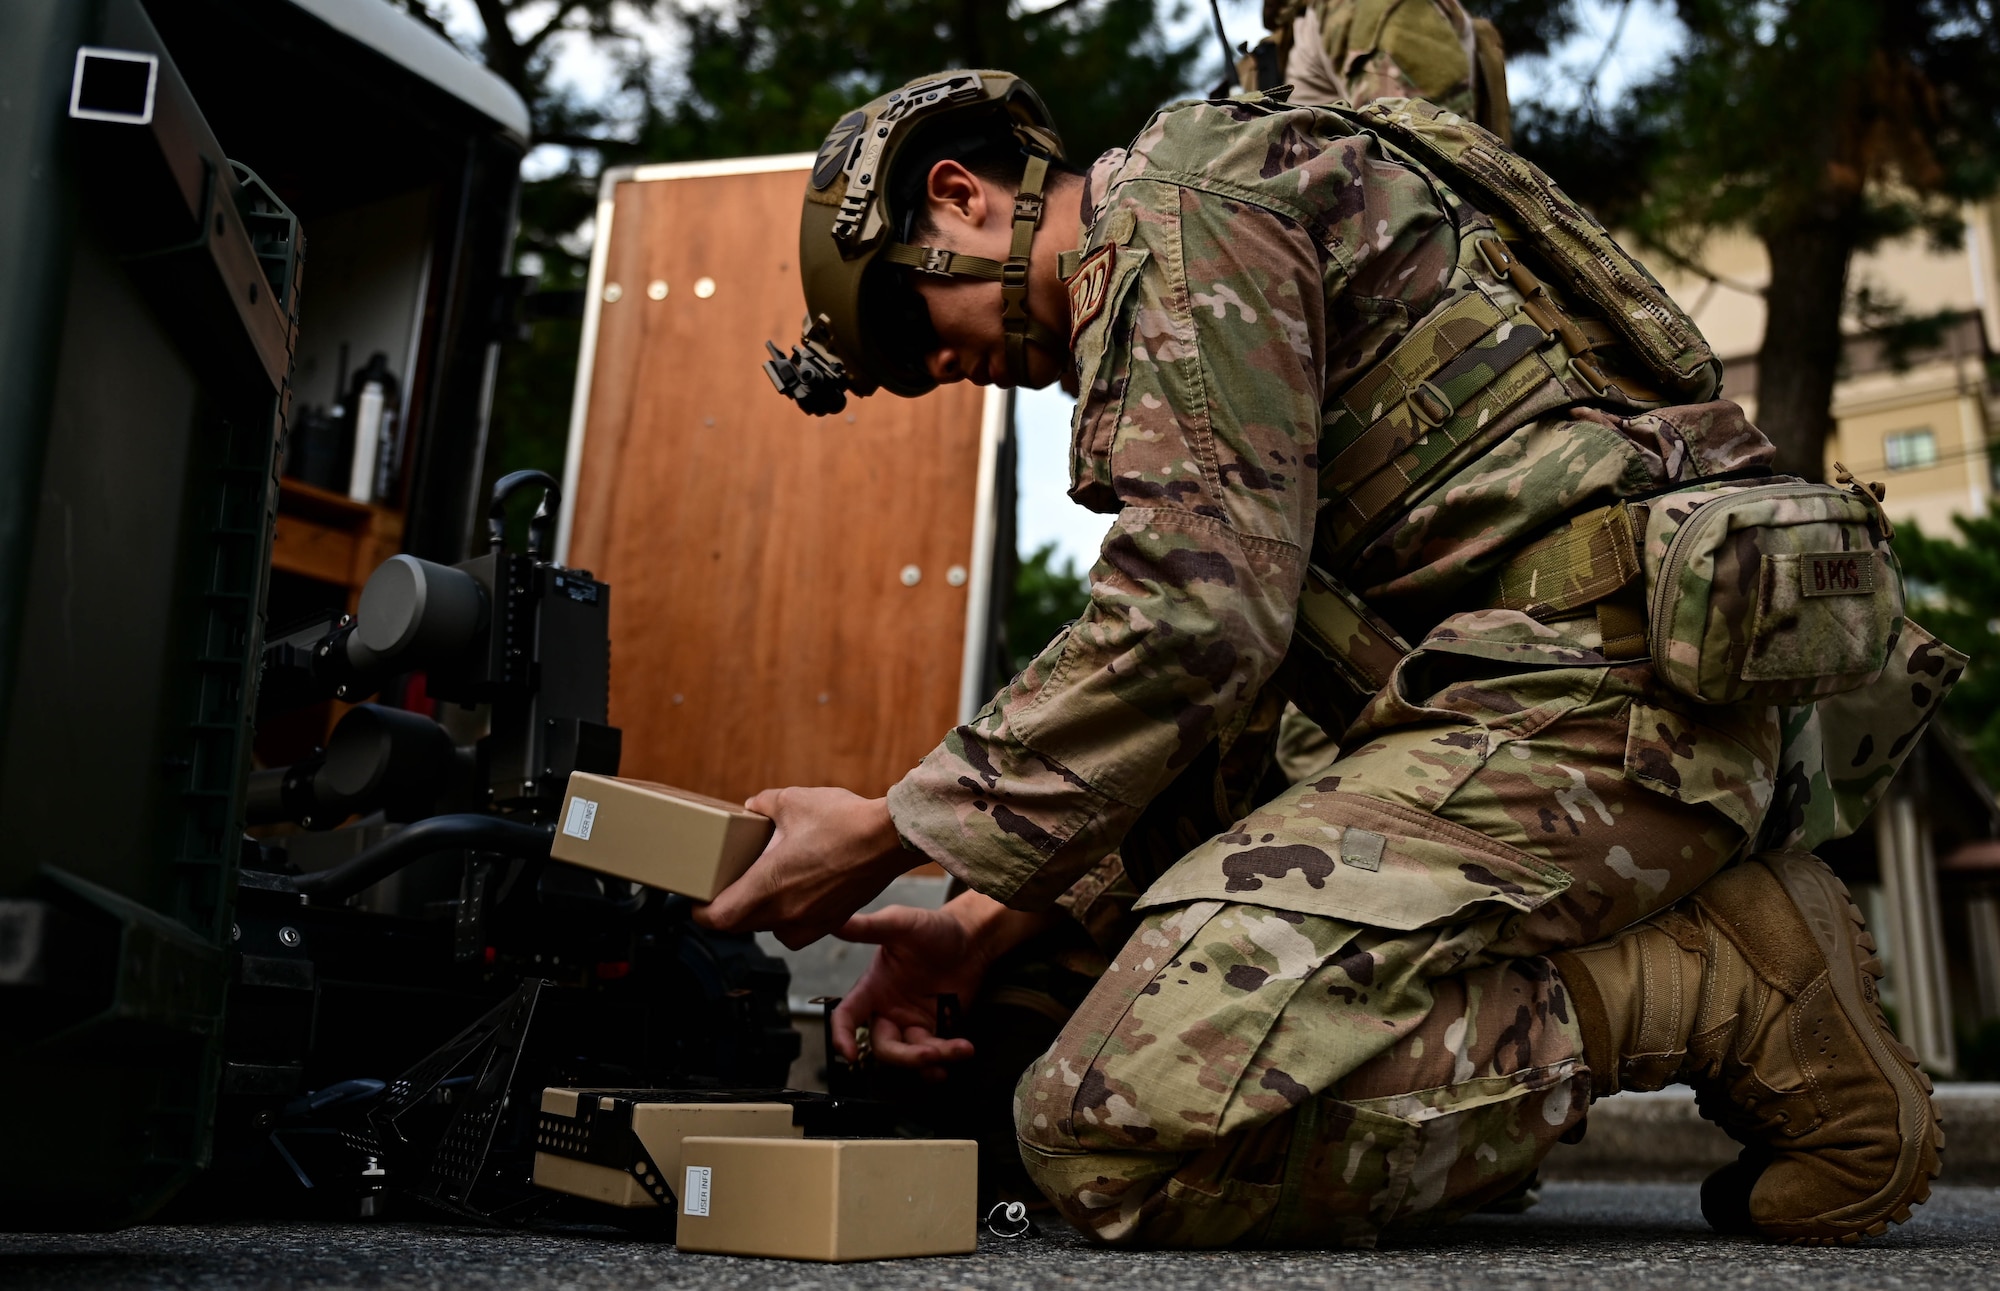 Kneeling military member places battery pack into robot.